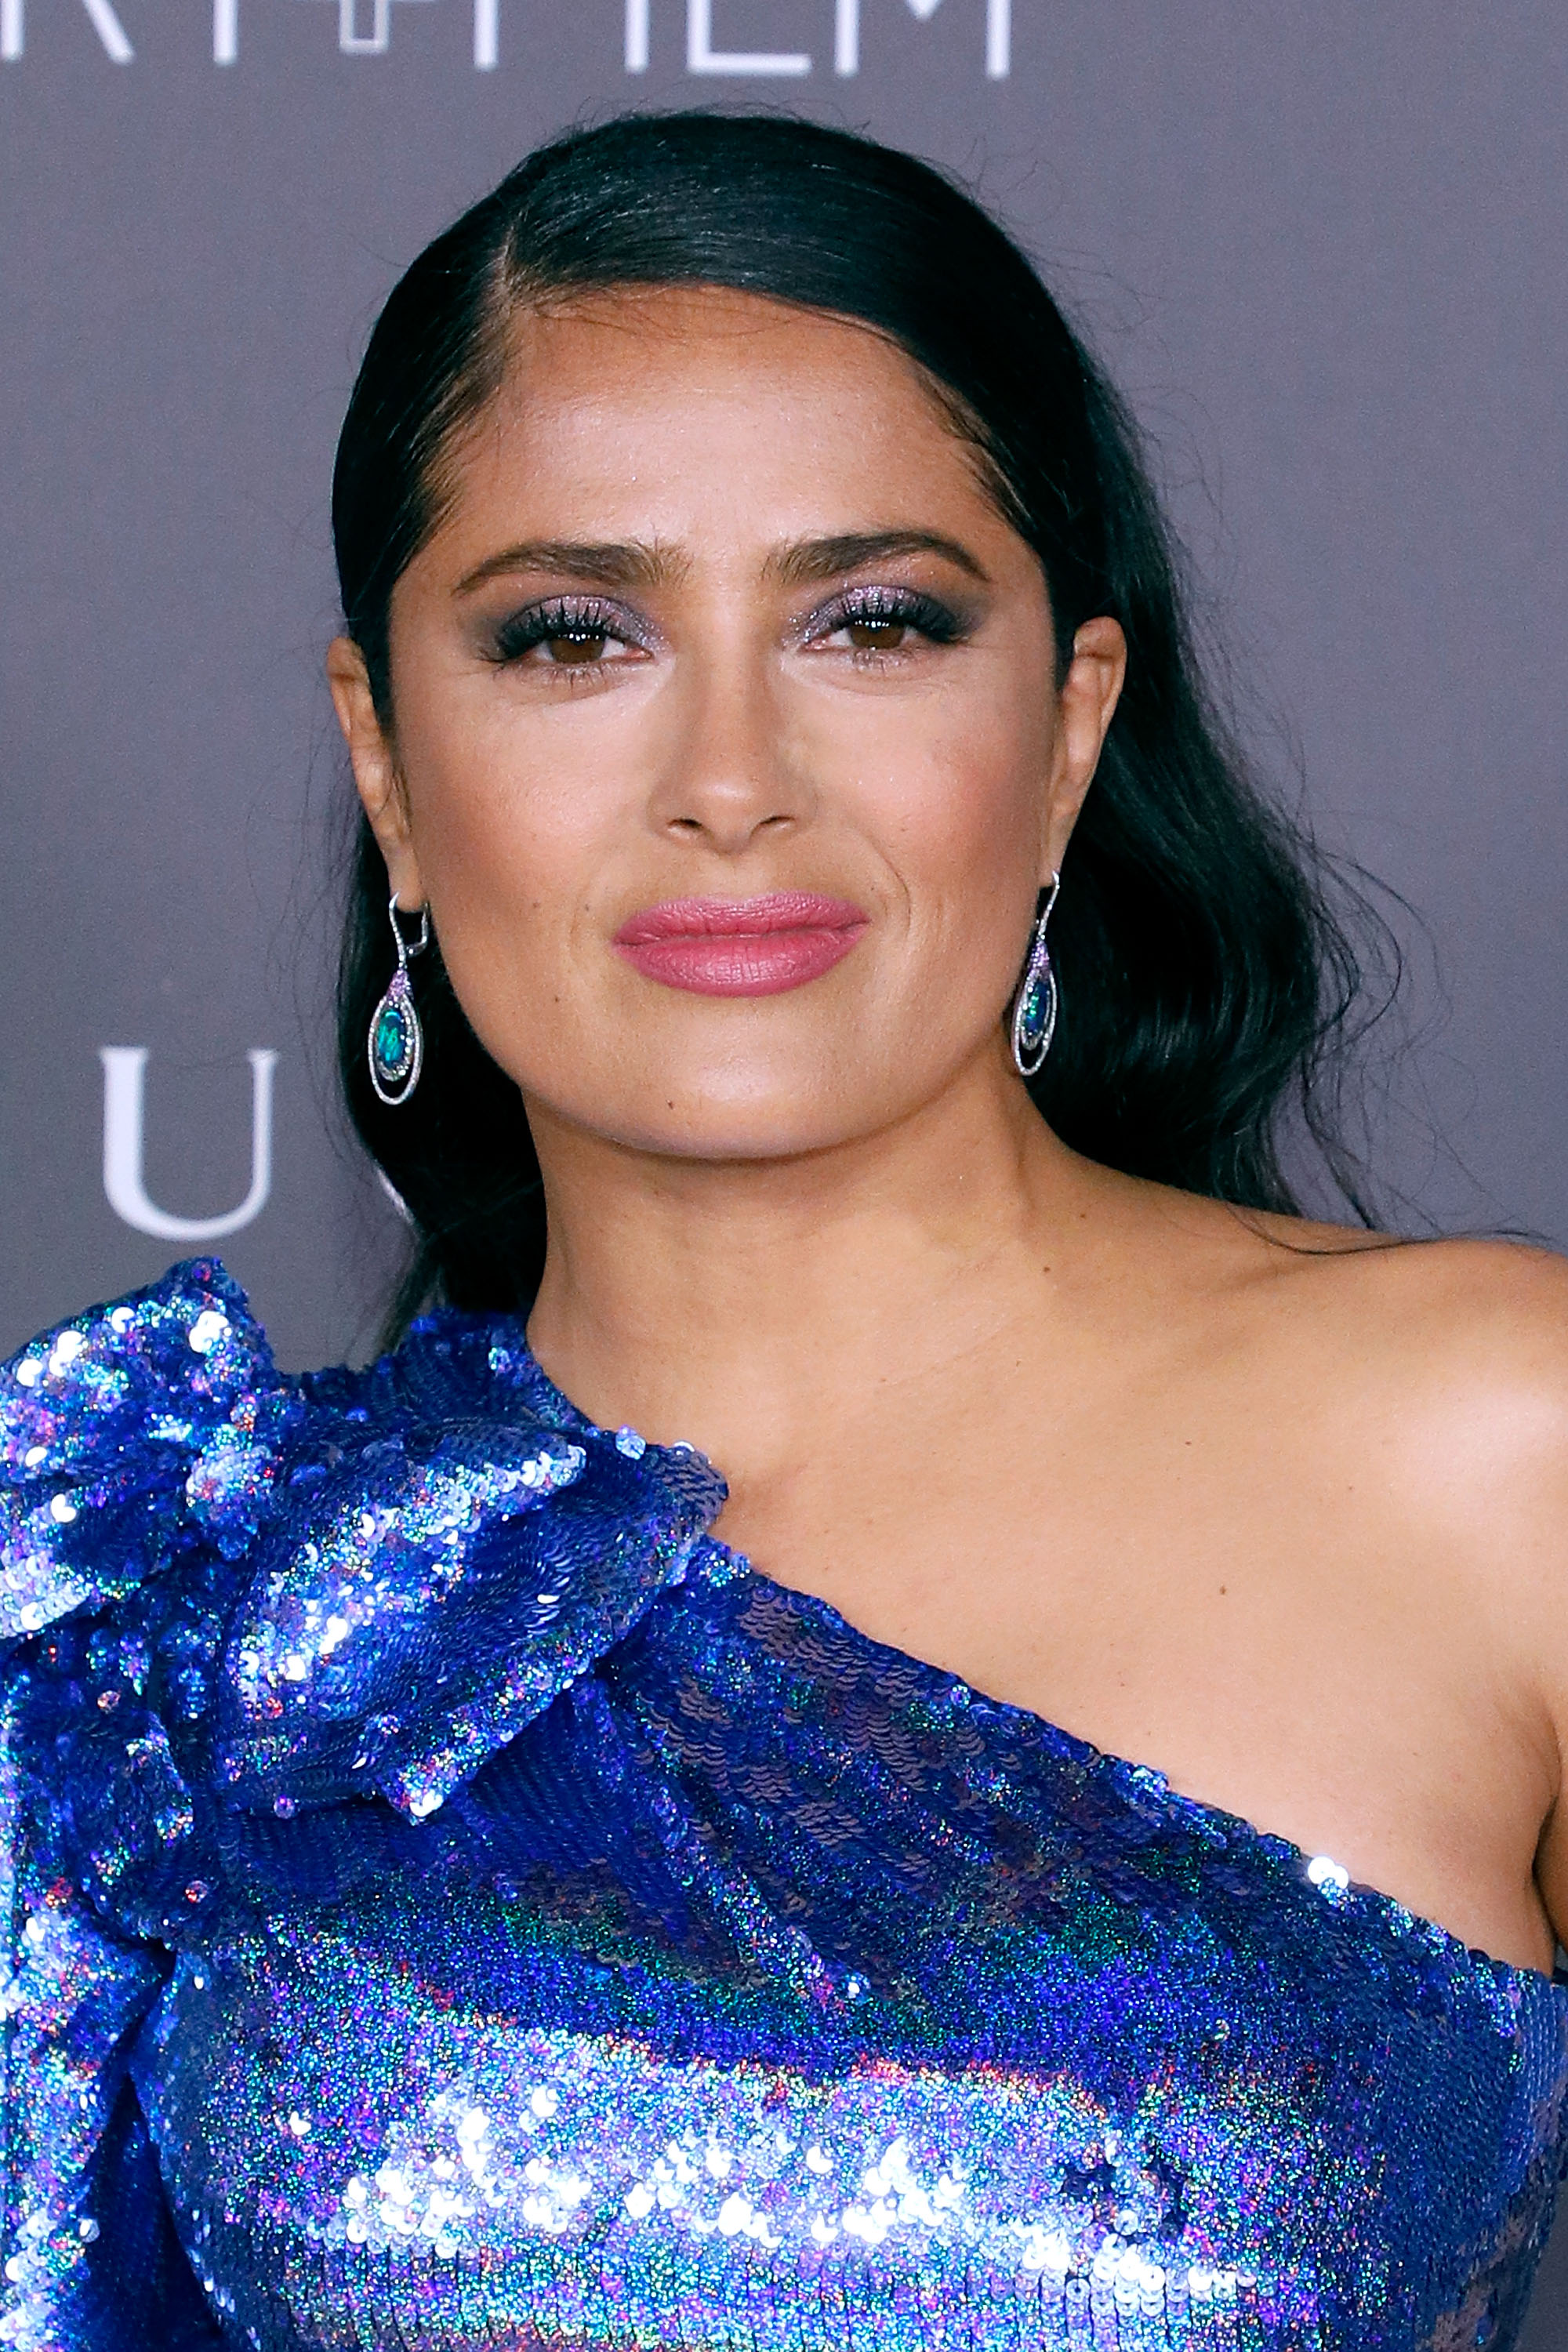 Salma Hayek attends the 2017 Art + Film Gala at LACMA on November 4, 2017 in Los Angeles, California. | Source: Getty Images